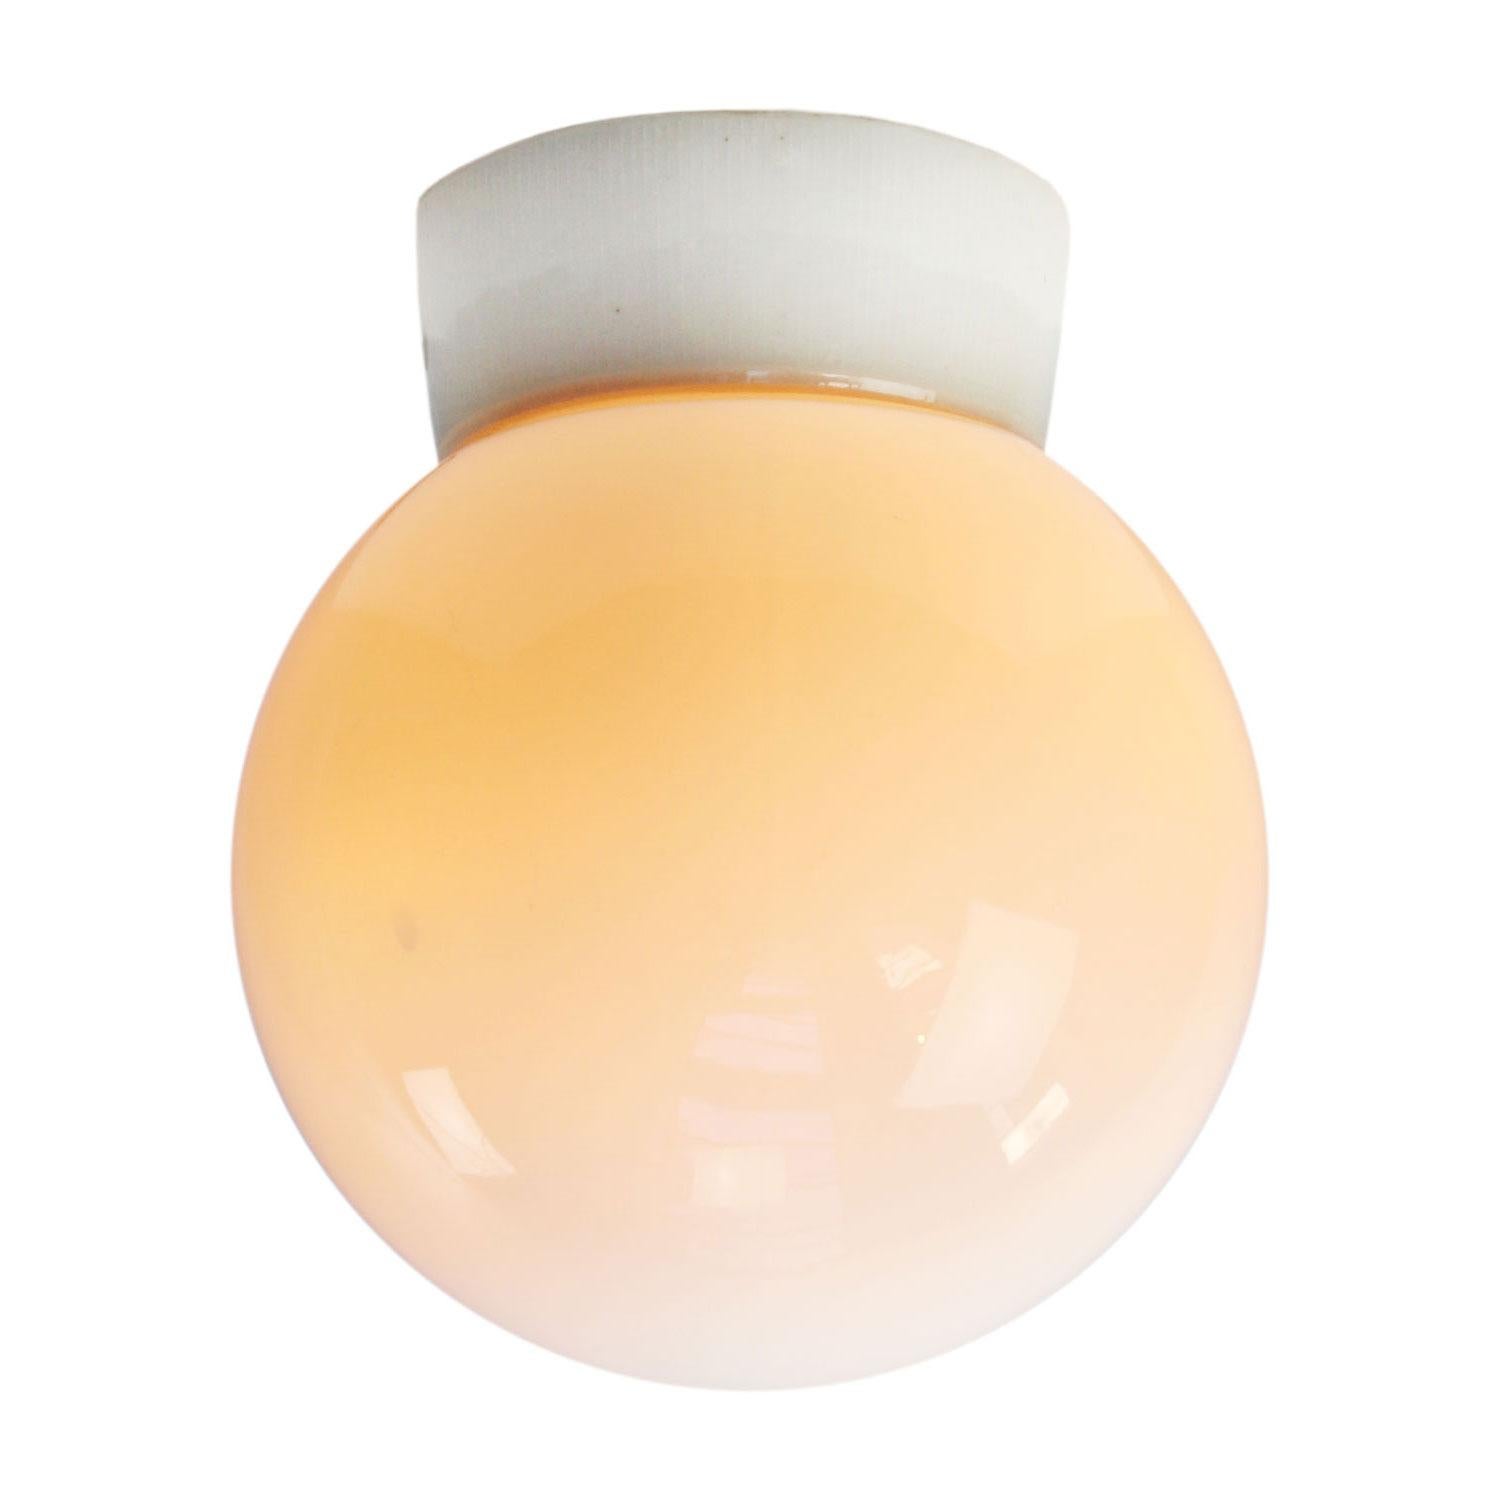 Industrial ceiling lamp.
White porcelain, white opaline glass.
2 conductors, no ground.
Measures: Diameter foot 12 cm

Weight: 1.30 kg / 2.9 lb

Priced per individual item. All lamps have been made suitable by international standards for